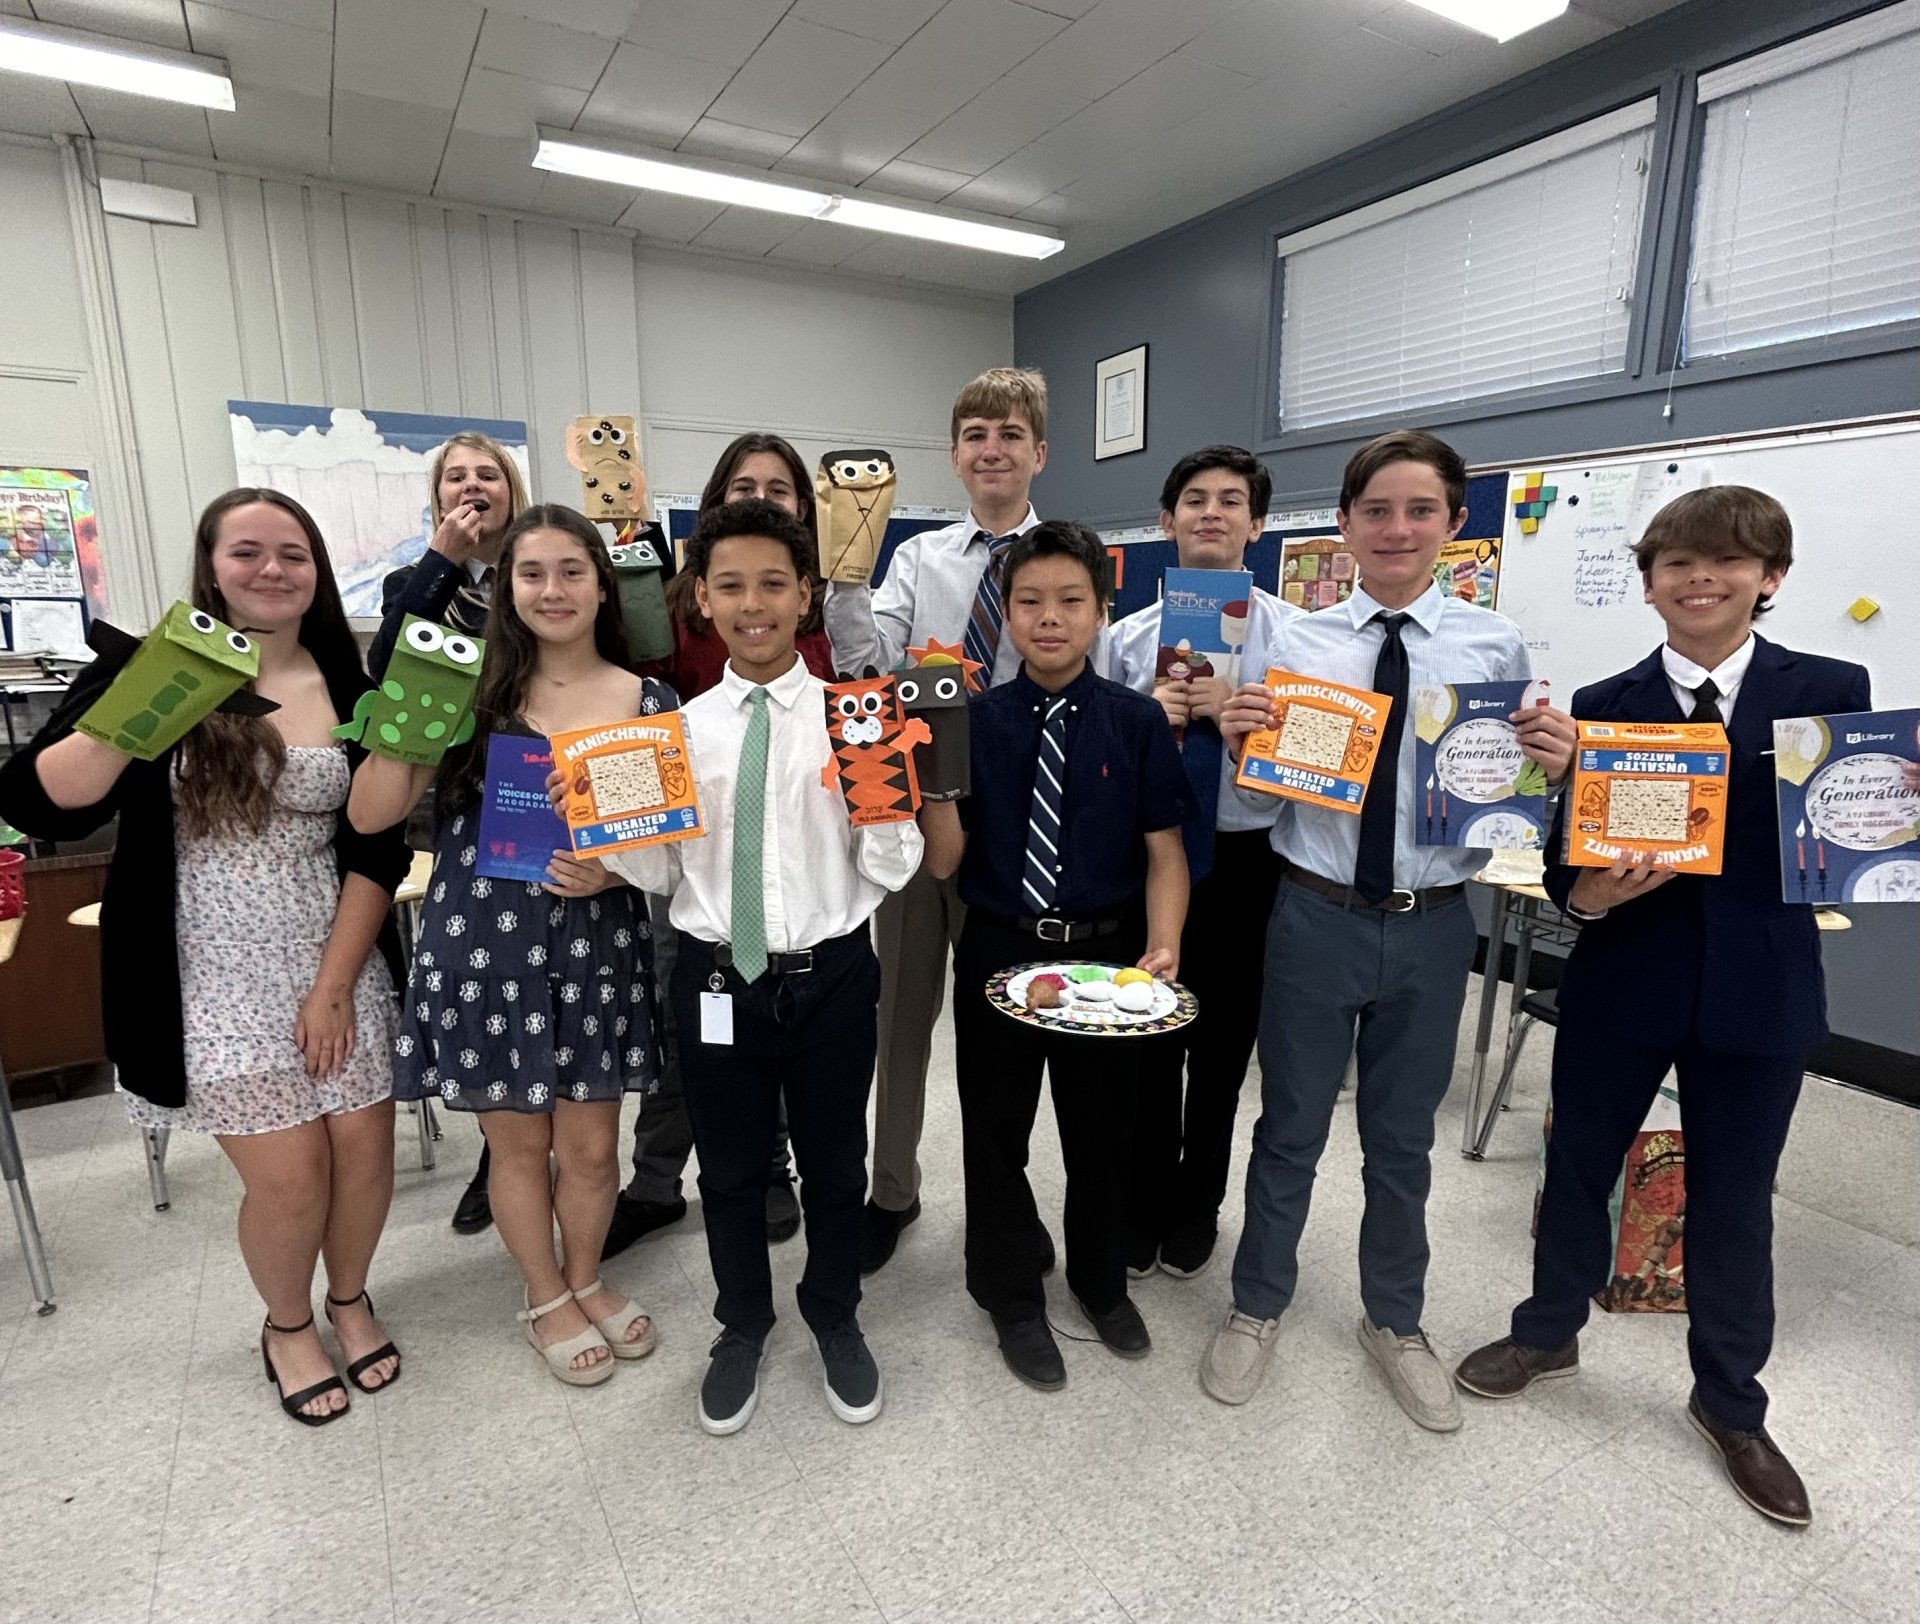 Seventh Grader Shares Story of Passover and Seder Meal with Classmates